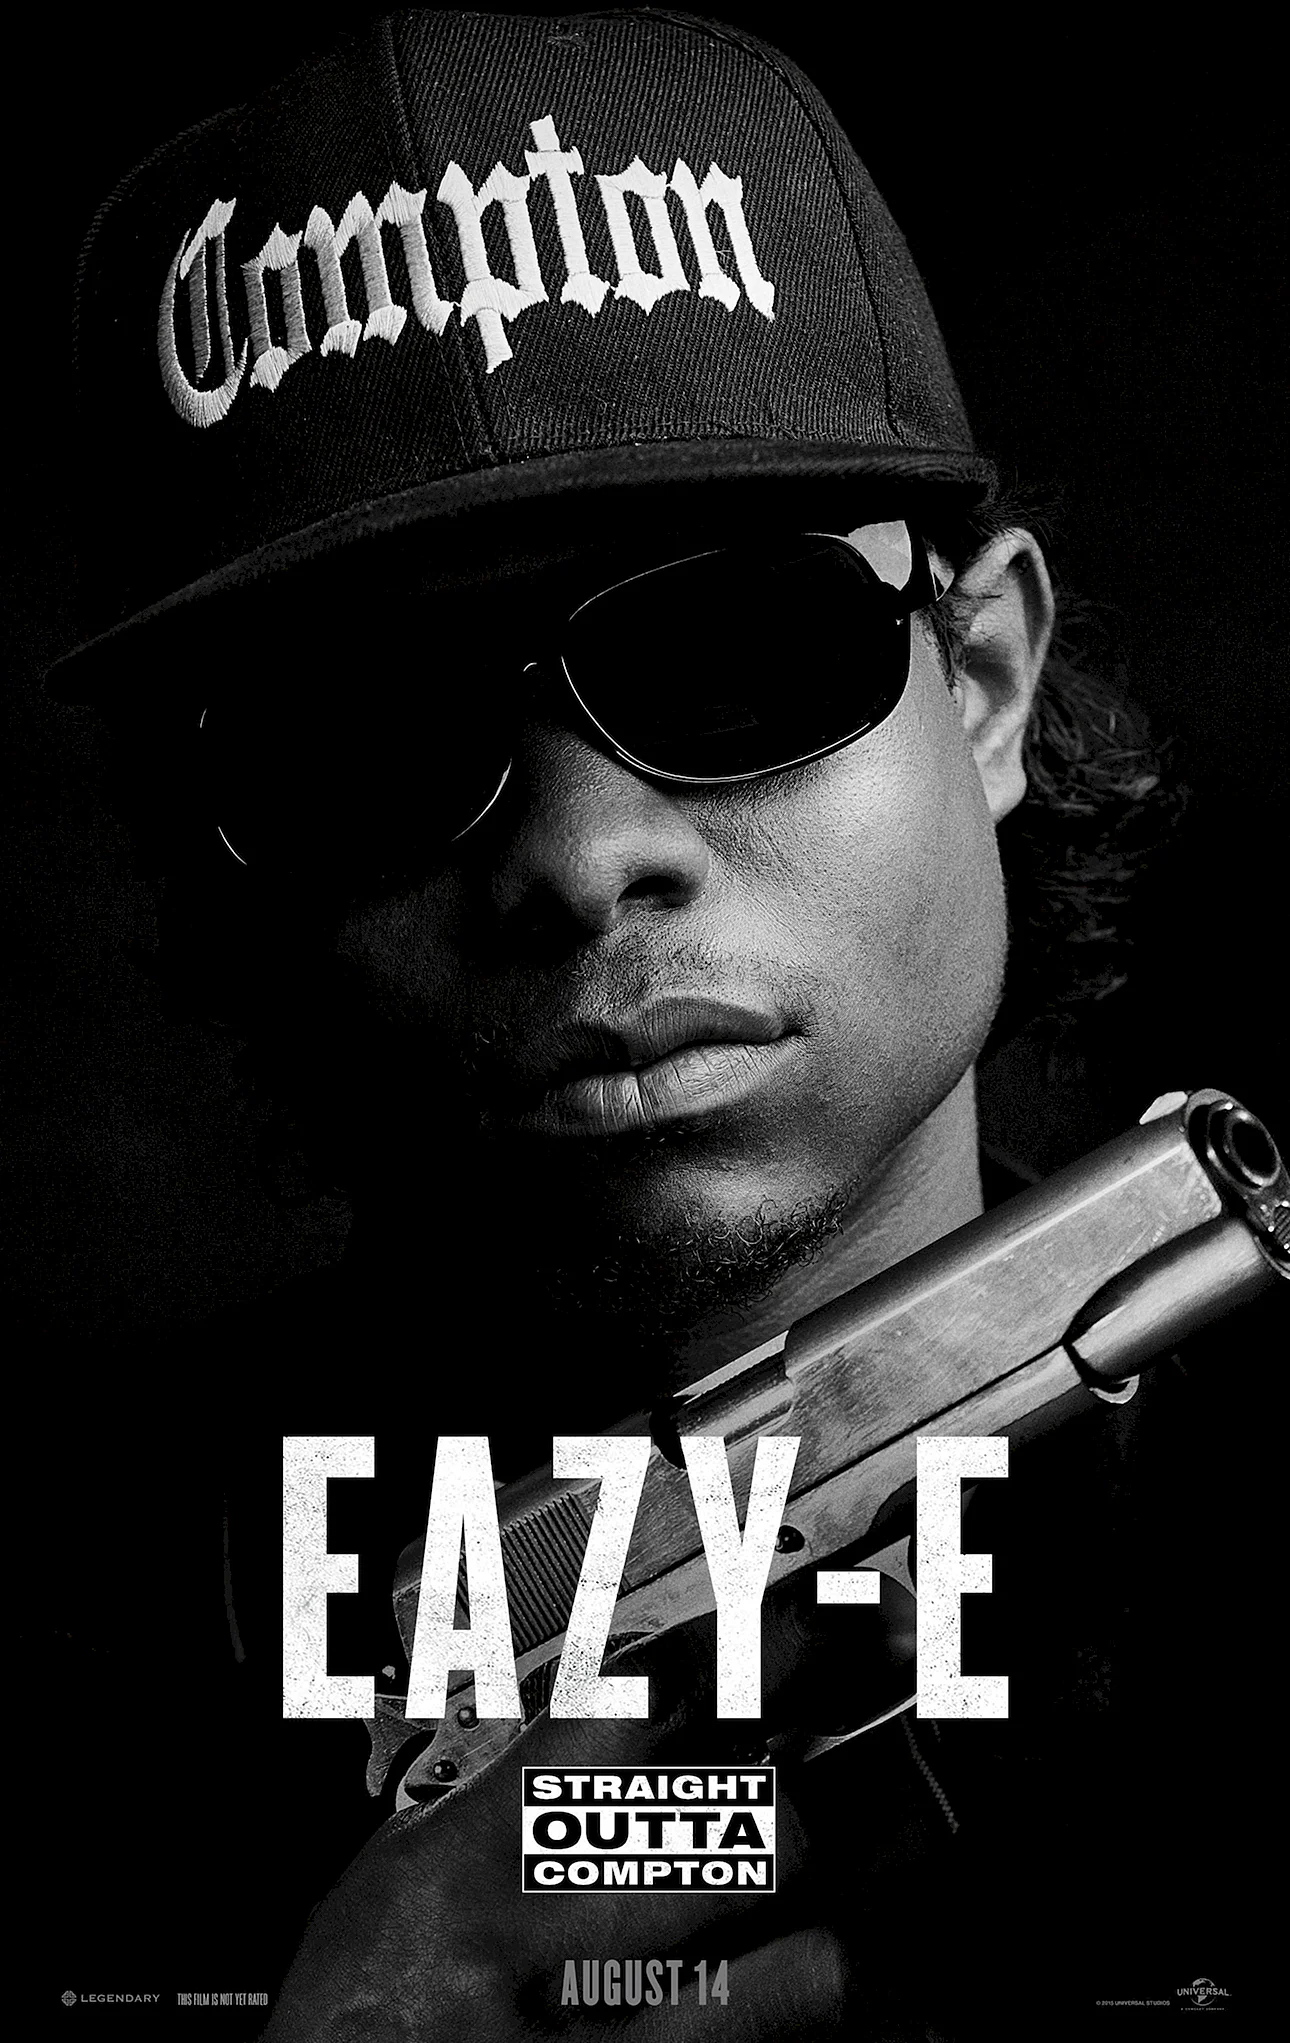 Straight Outta Compton 2015 Wallpaper For iPhone